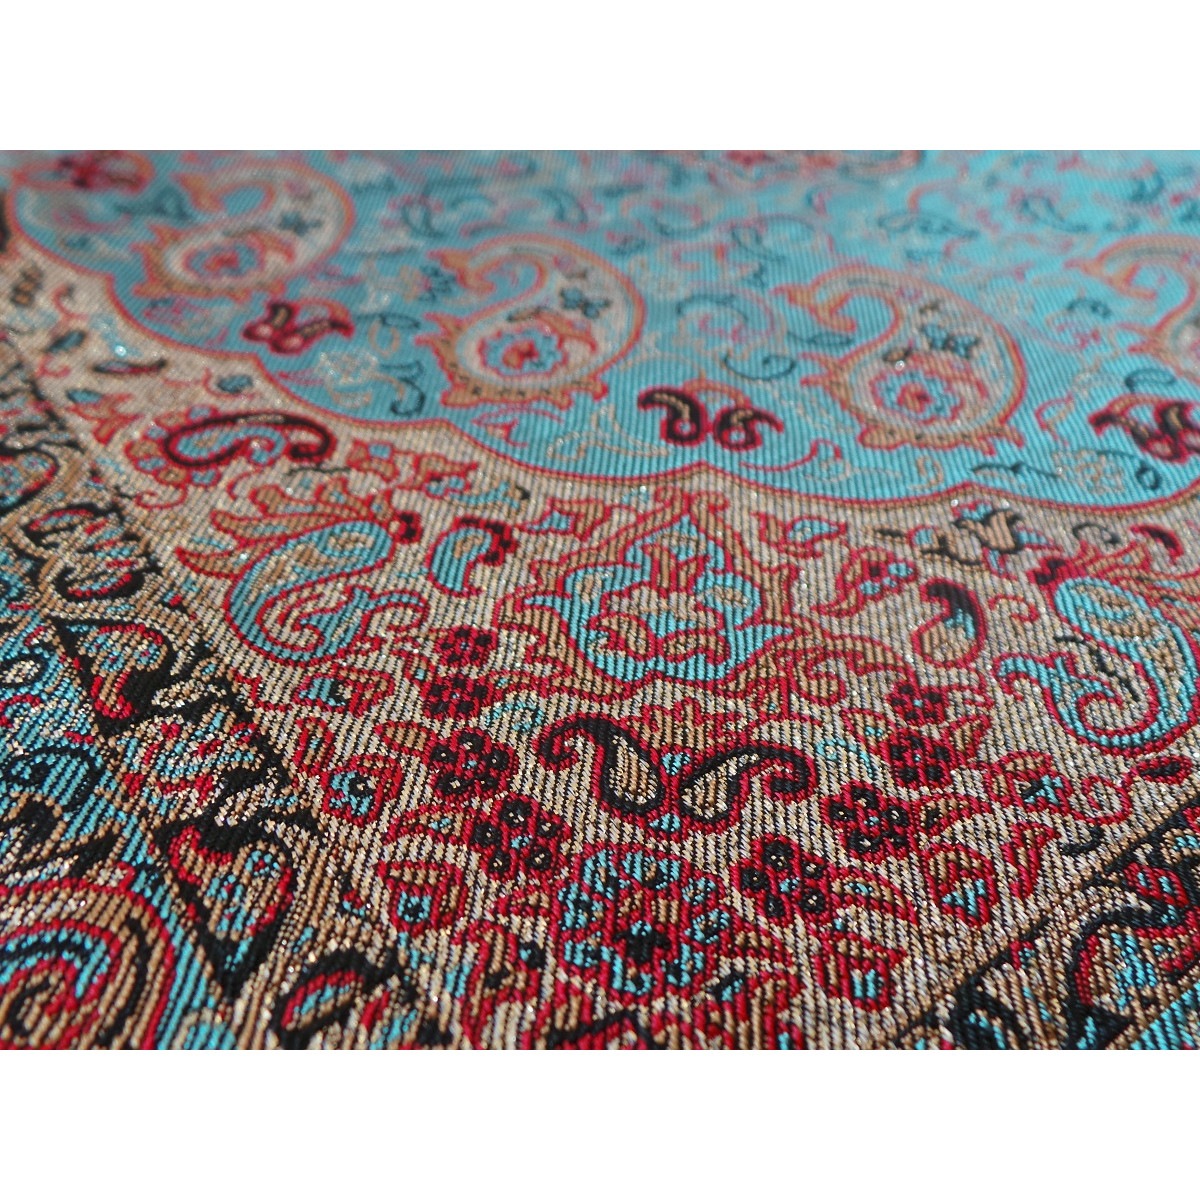 Termeh Luxury Tablecloth/Cushion Cover - HT2062-Persian Handicrafts